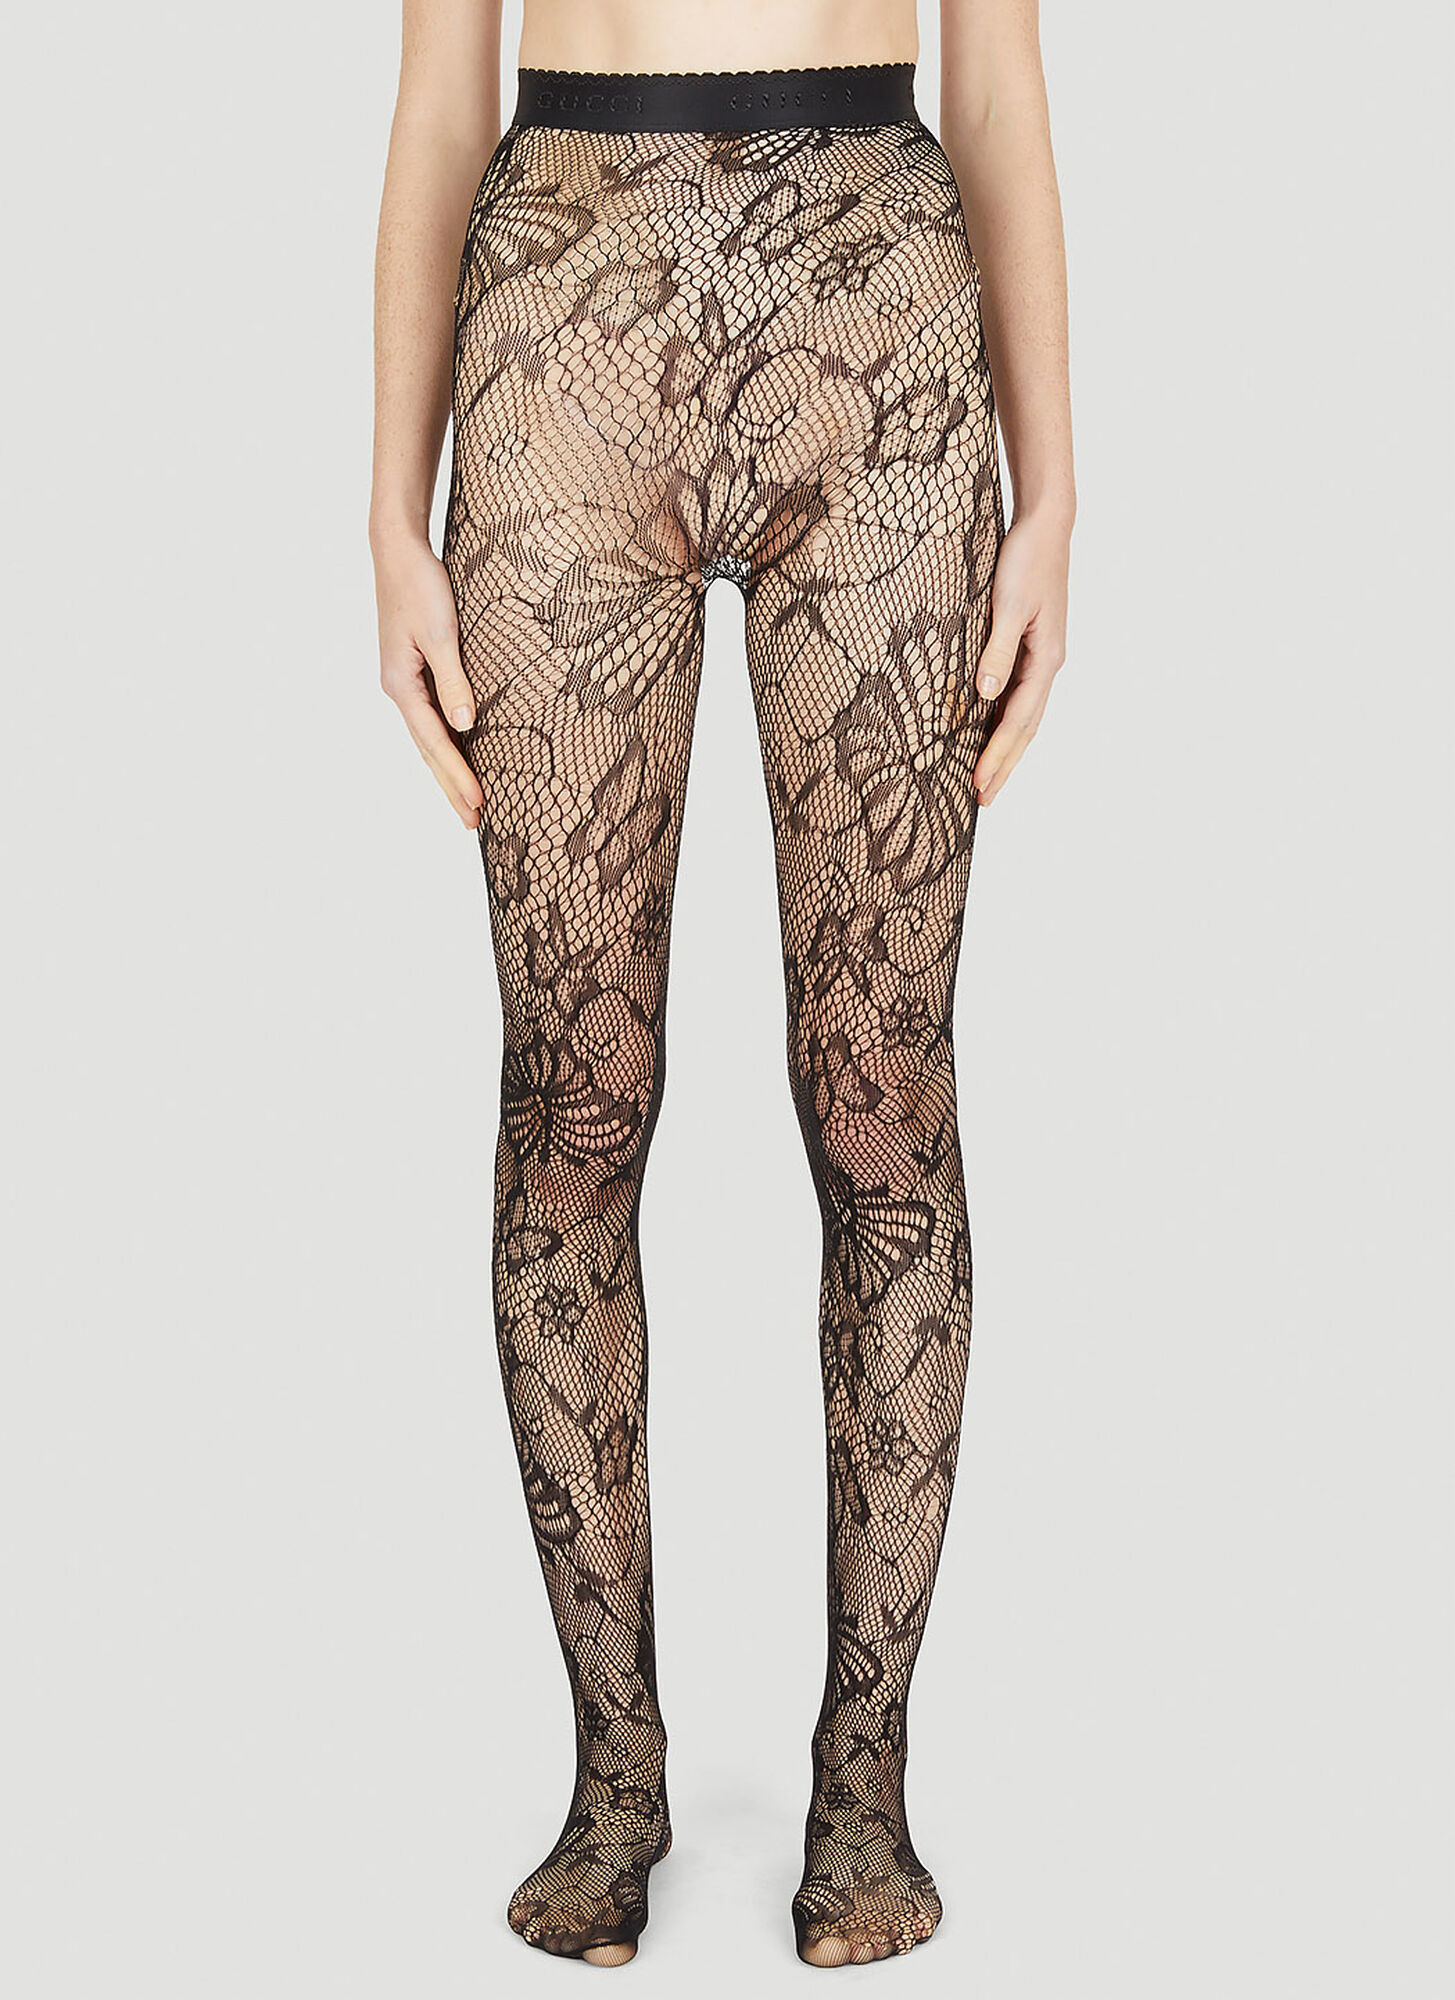 Gucci Butterfly Motif Tights Female Black